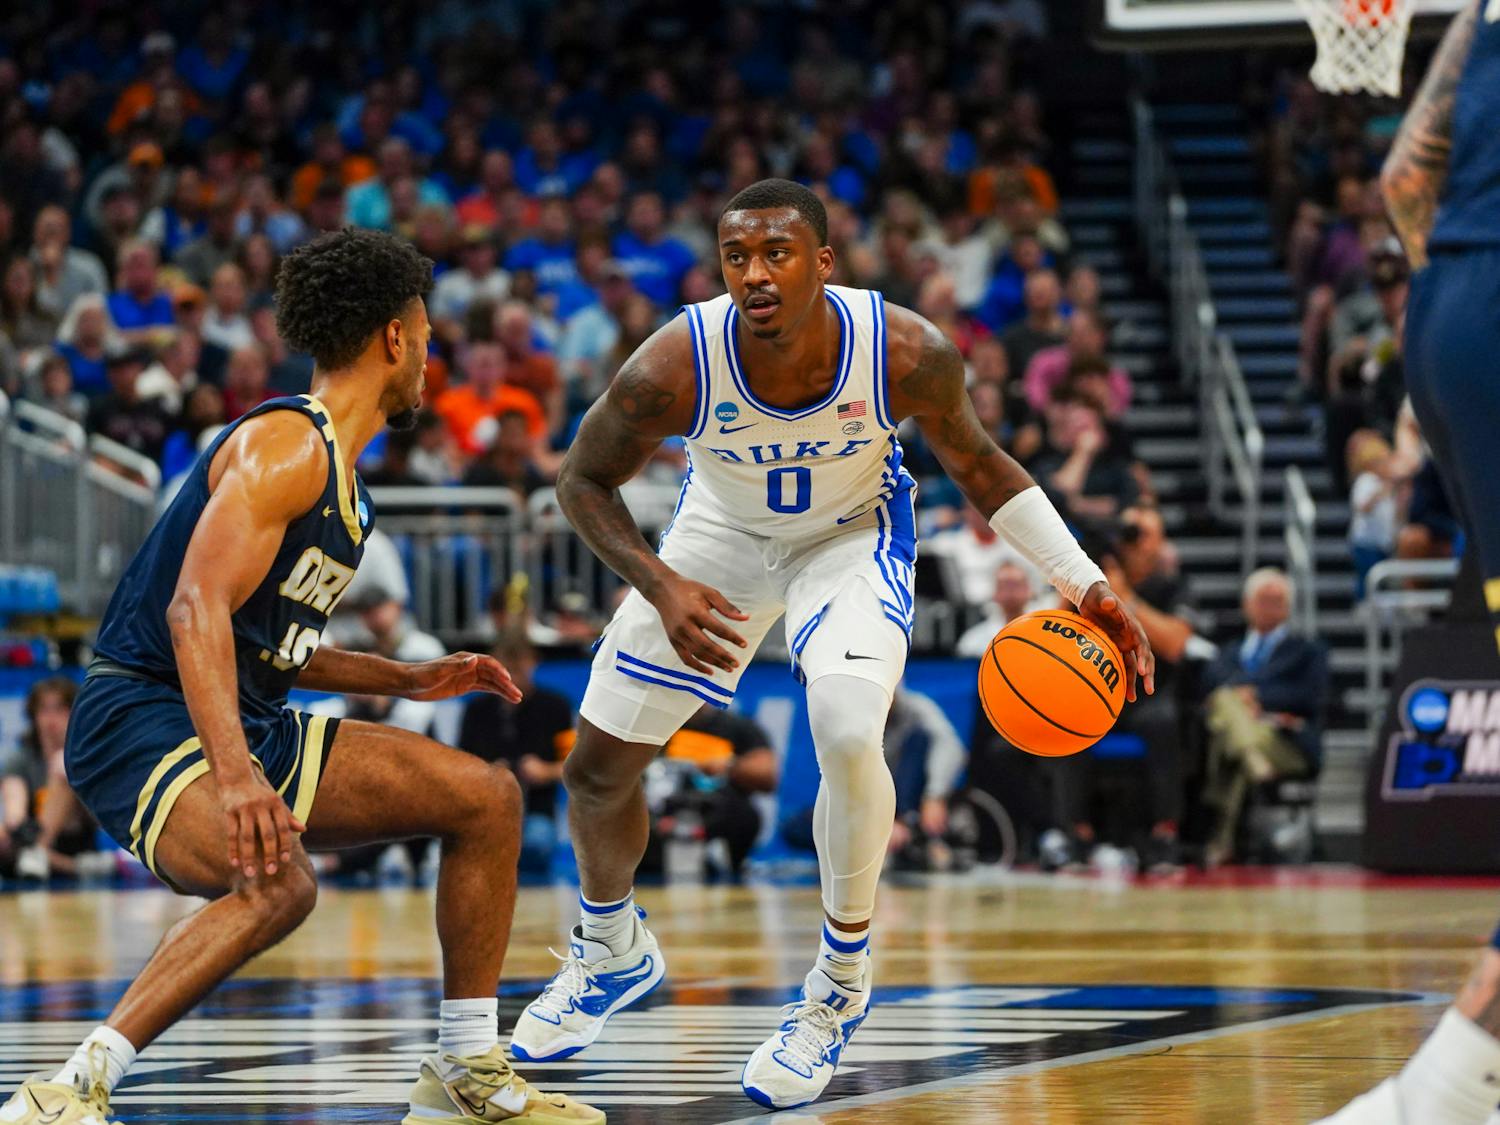 Dariq Whitehead had 13 points in Duke's first-round defeat of Oral Roberts.